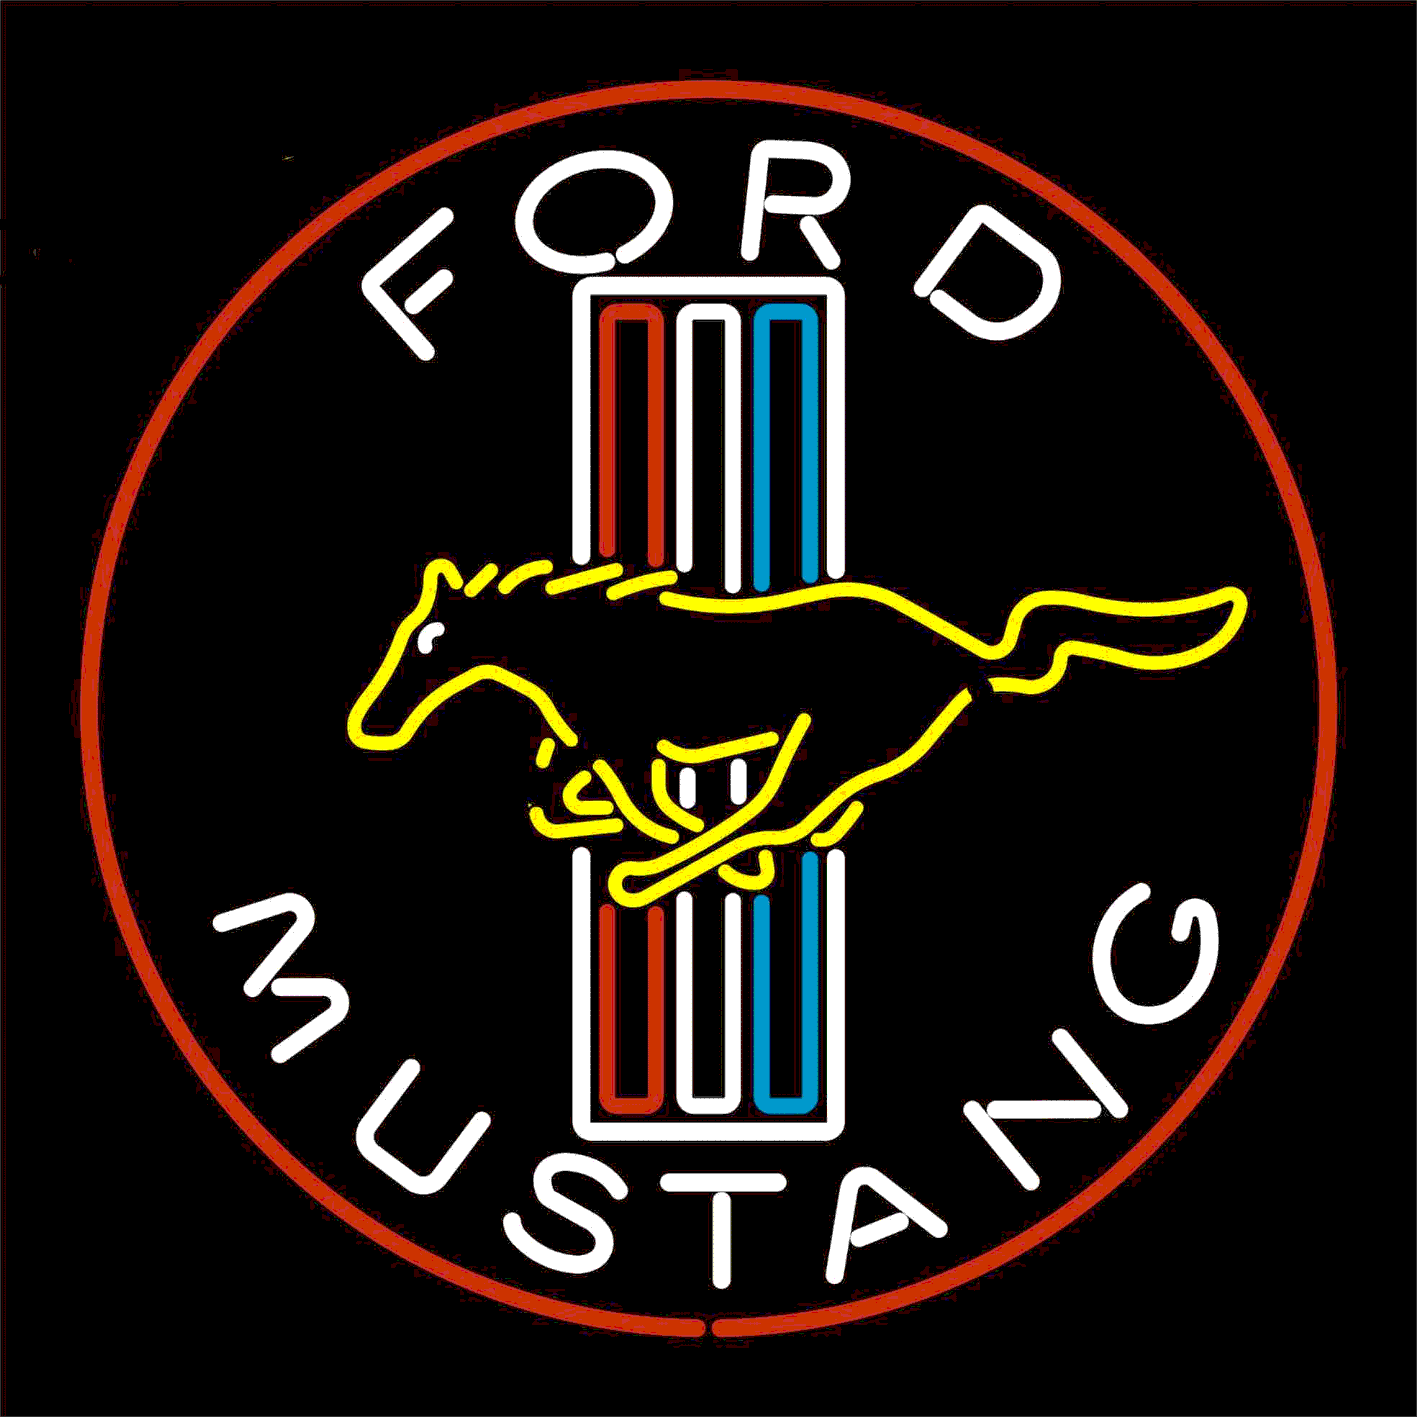 Cool Ford Logo - Free Ford Mustang Logo, Download Free Clip Art, Free Clip Art